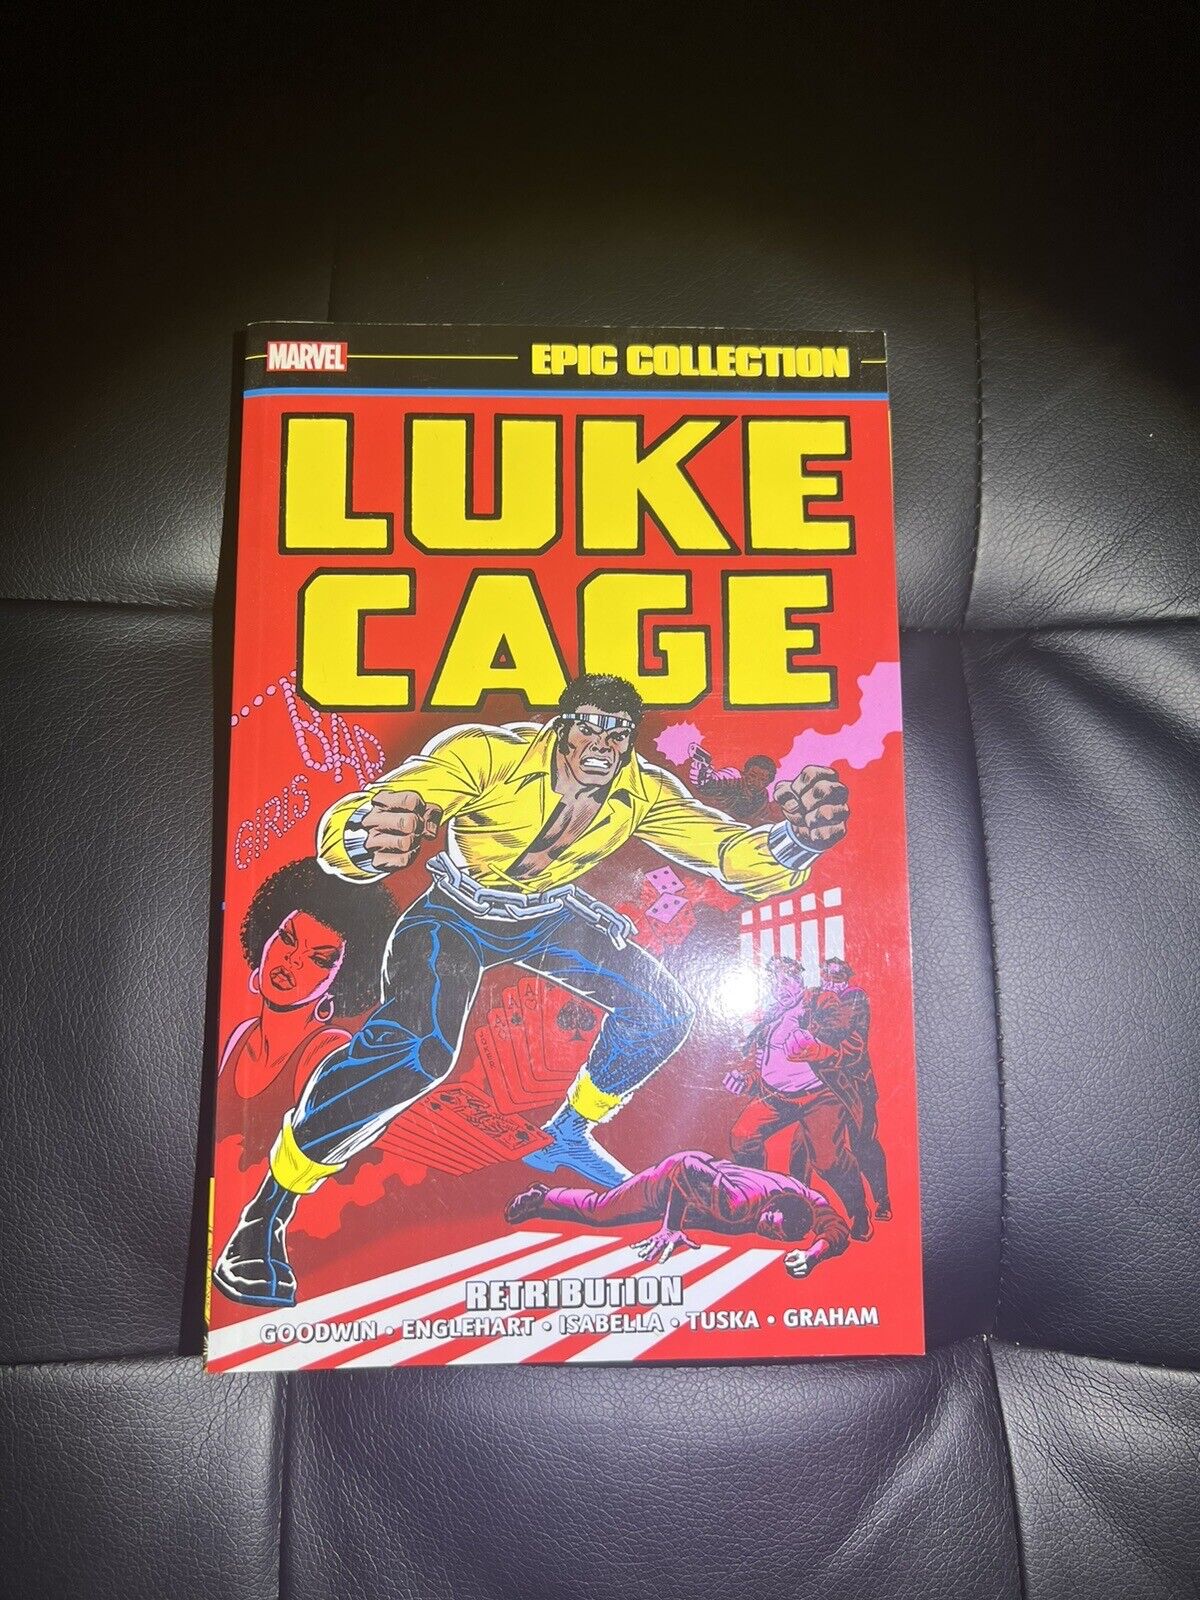 Luke Cage Epic Collection #1 (Marvel, 2020)